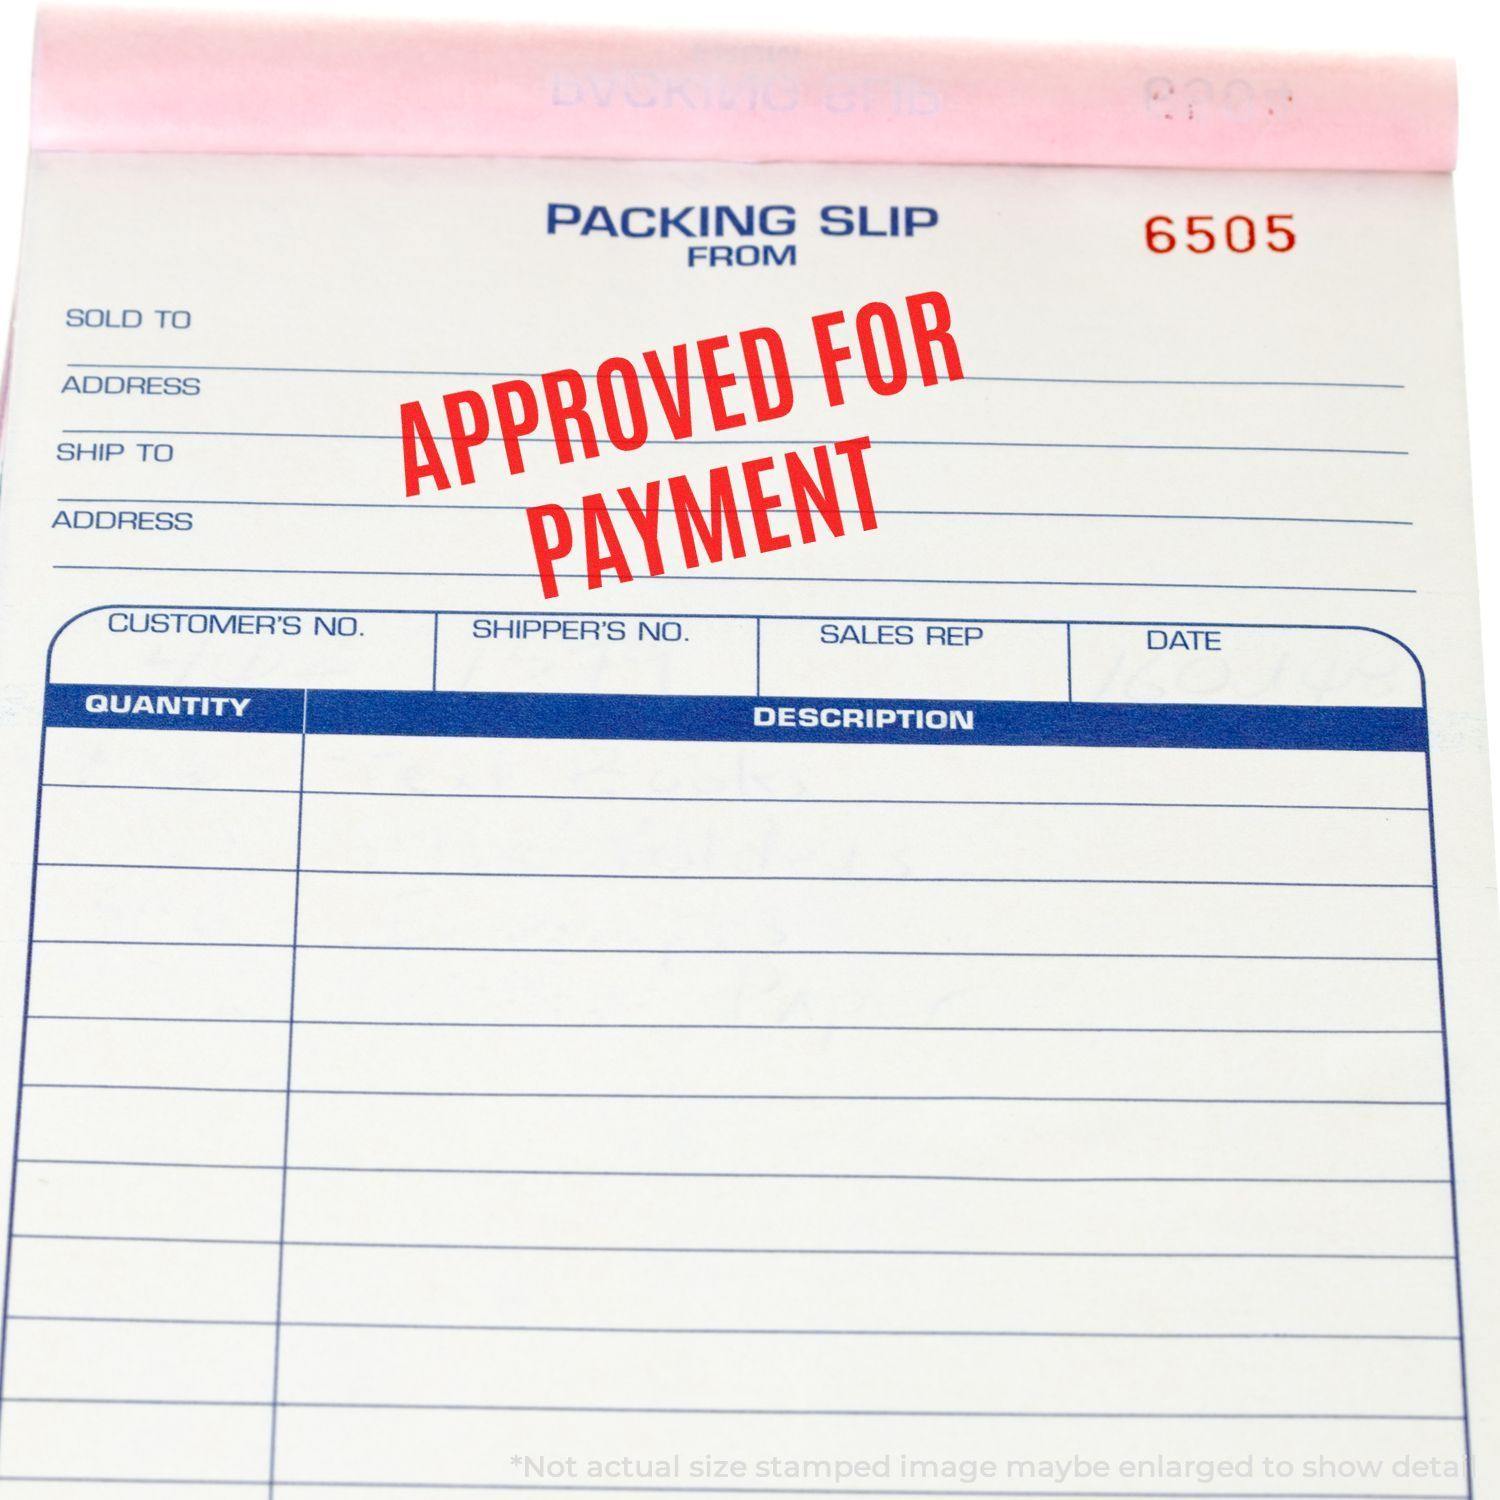 A stock office rubber stamp with a stamped image showing how the text "APPROVED FOR PAYMENT" in a narrow font is displayed after stamping.